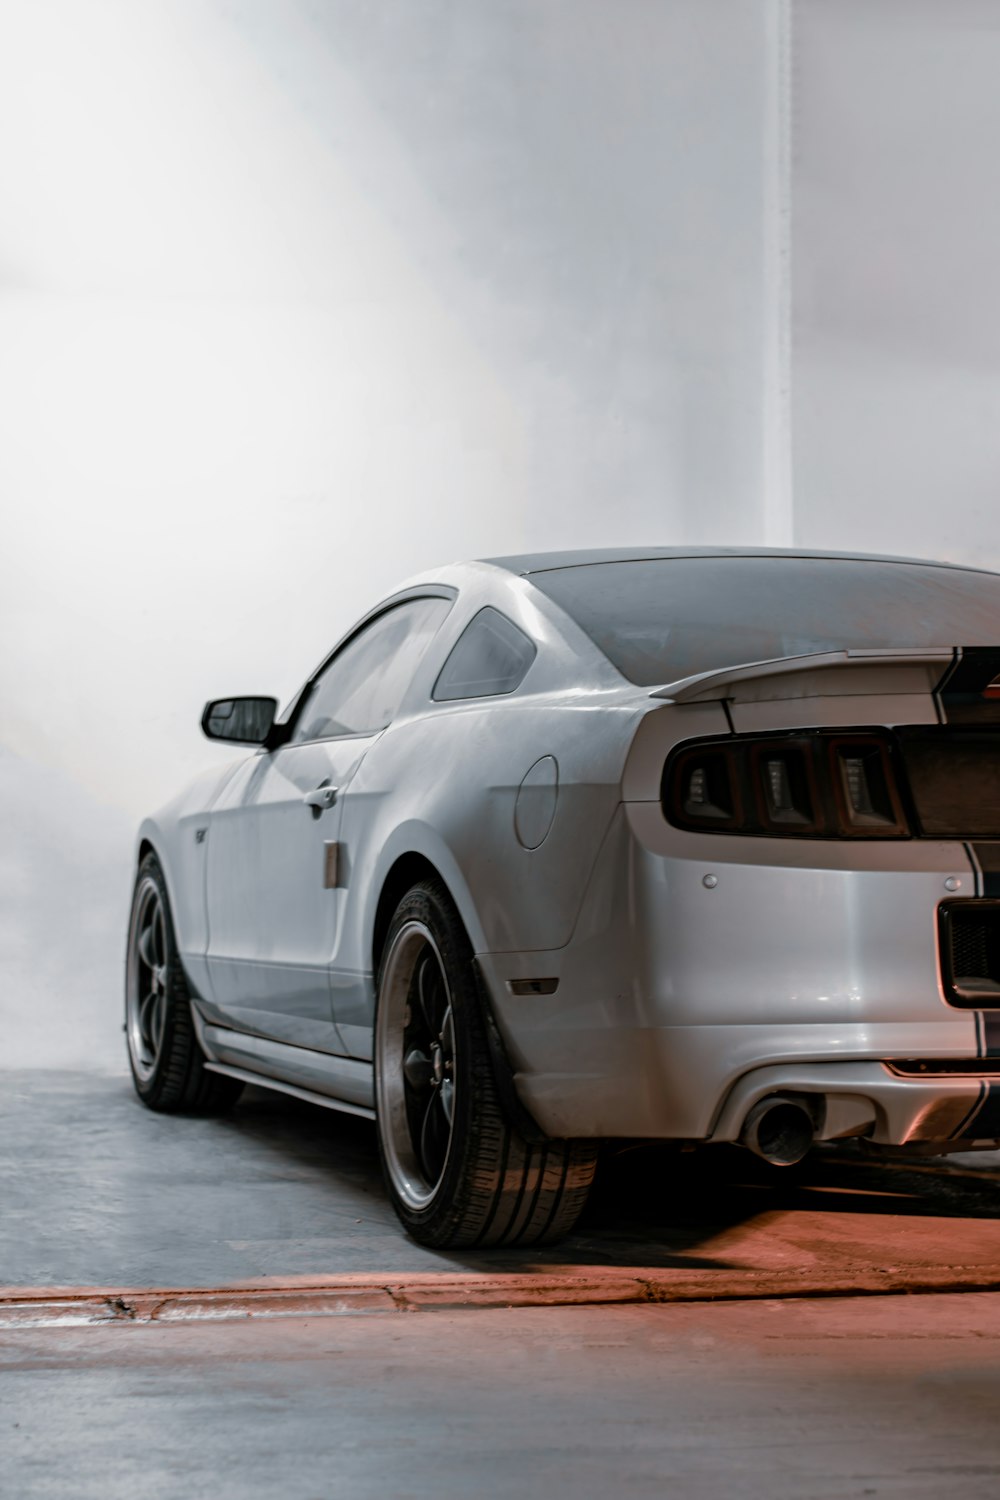 a white mustang car parked in a garage